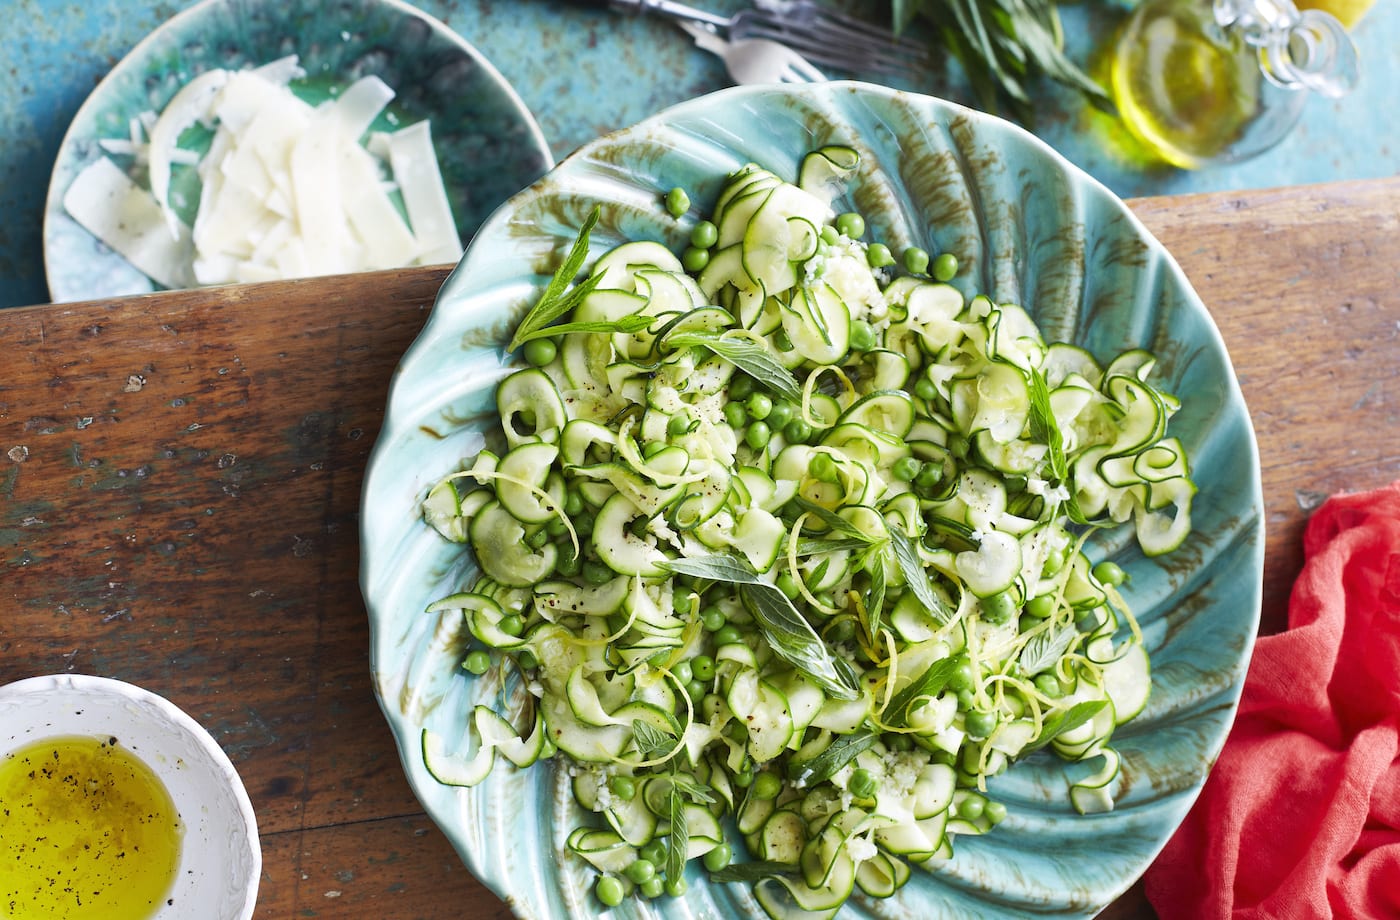 How to make zoodles that don't drown in their own bodily fluids before dinnertime